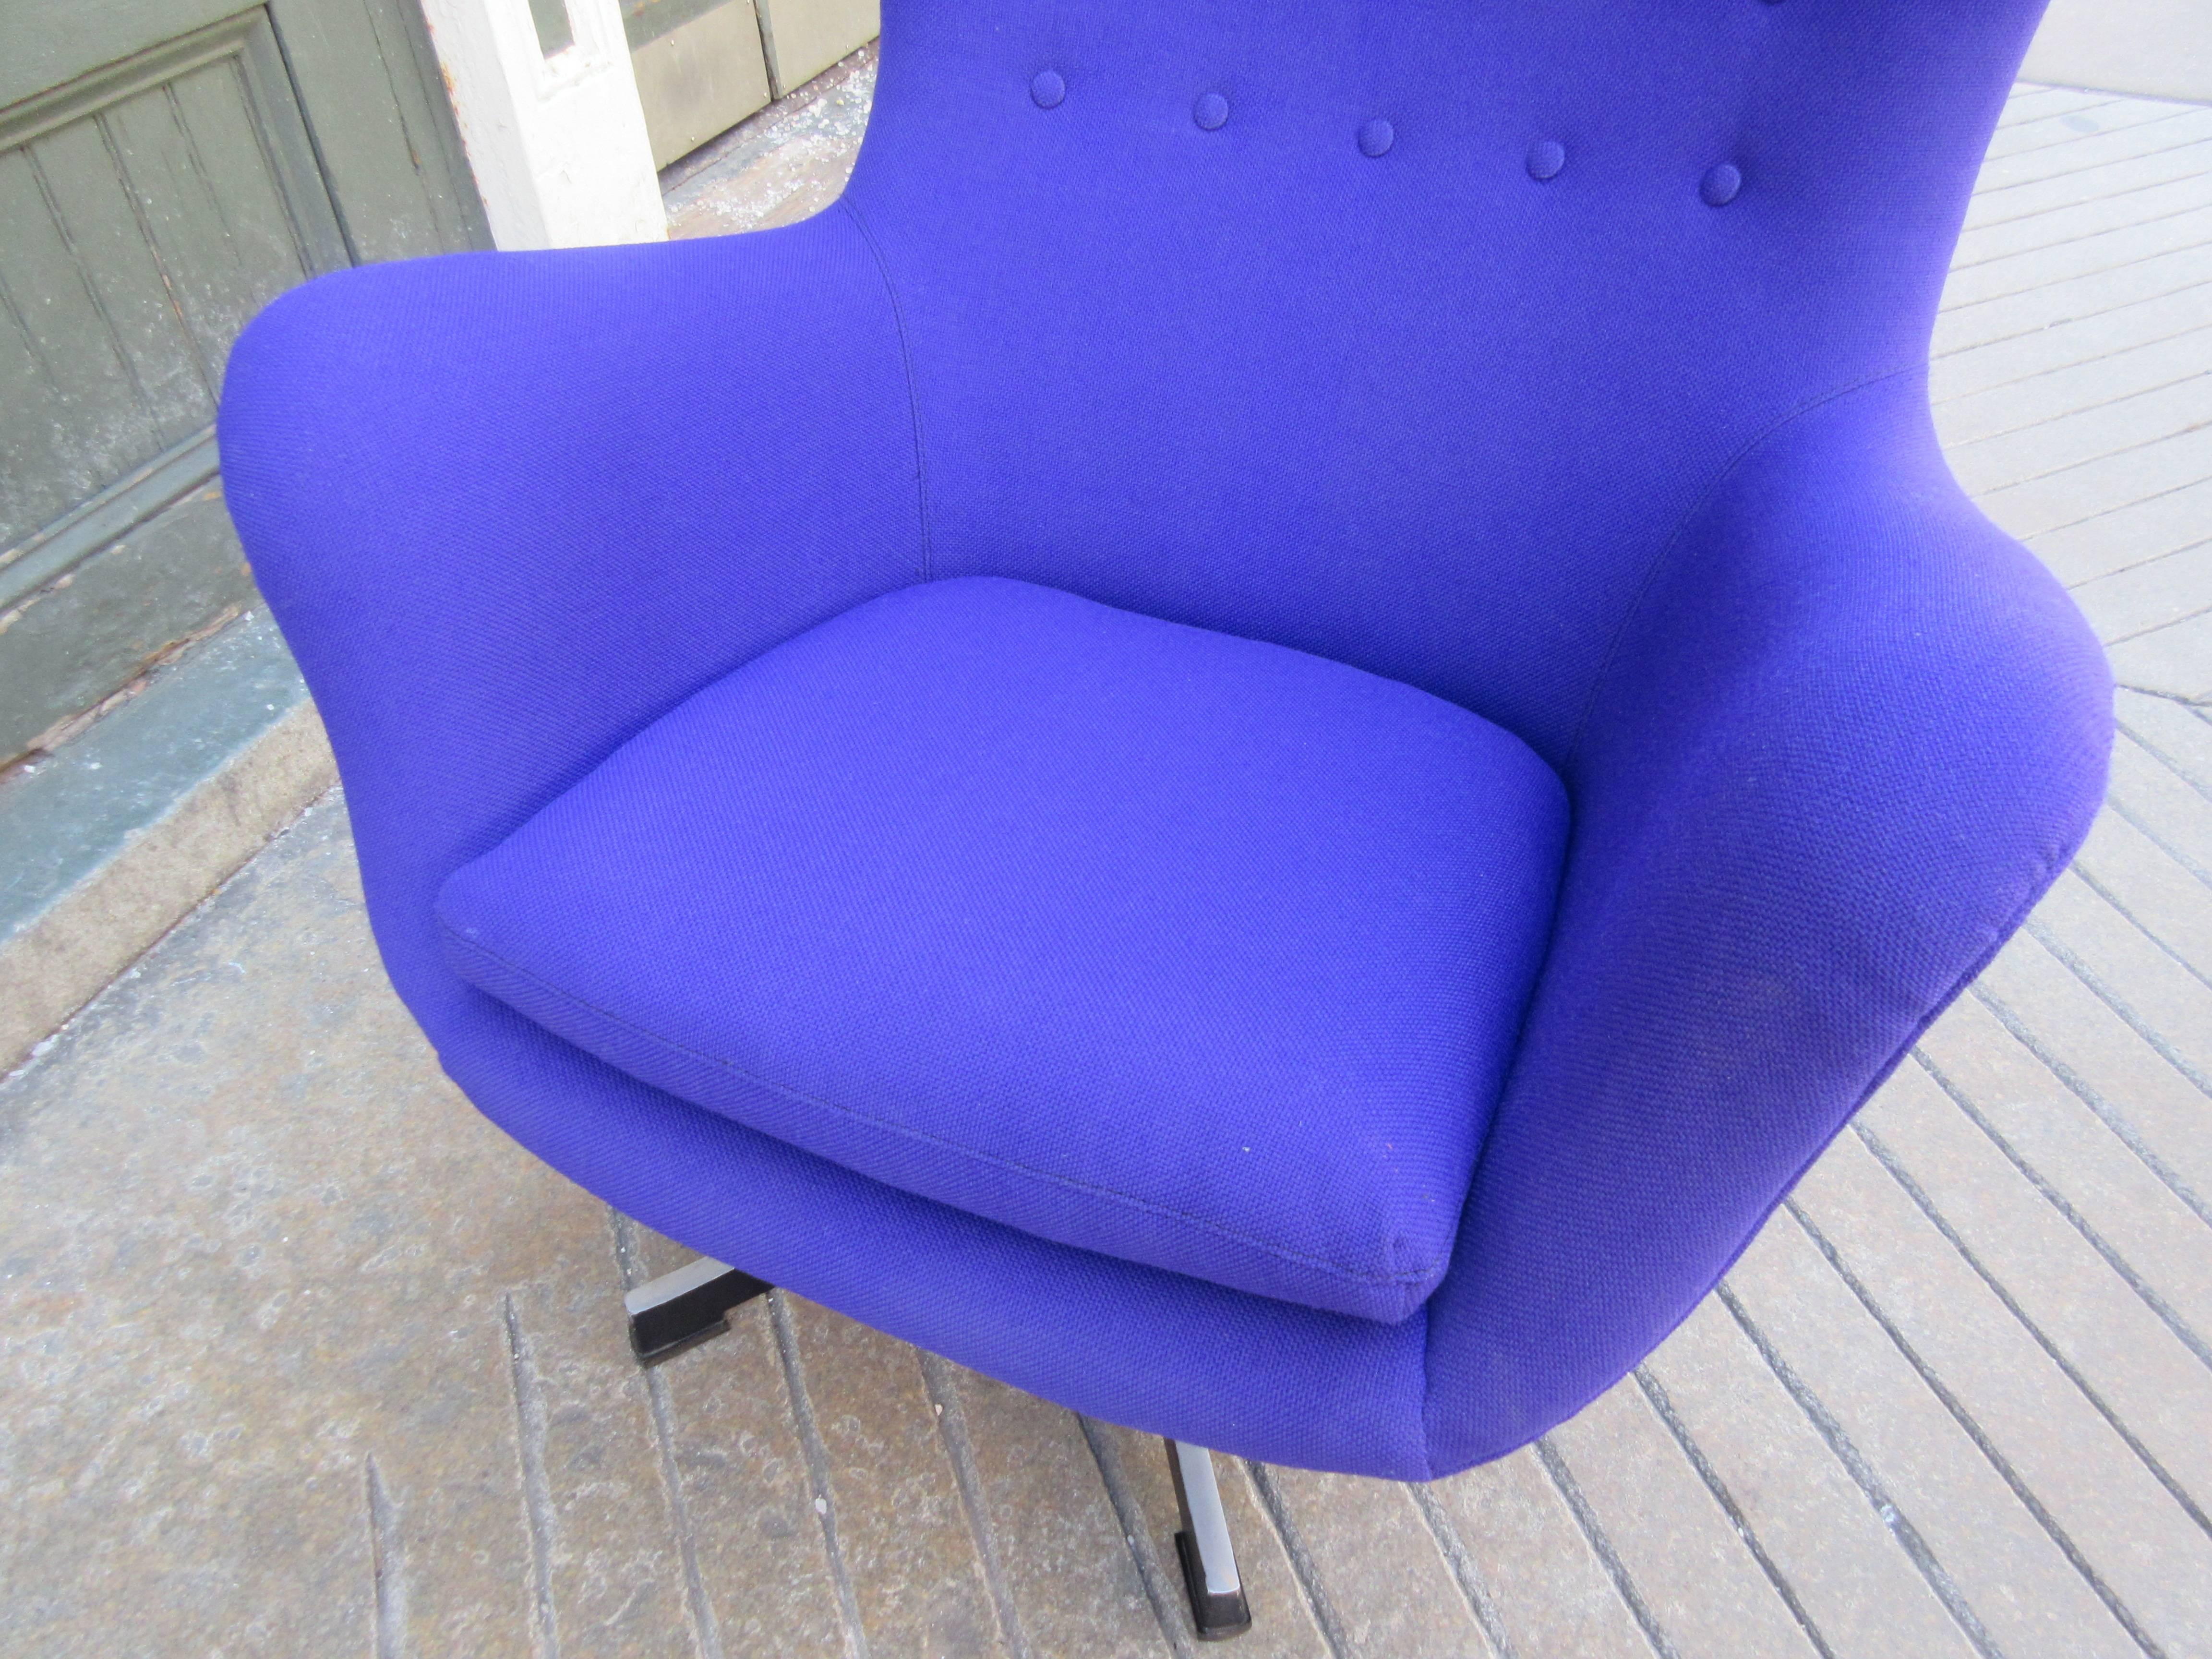 In the style of Arne Jacobsen's classic egg chair! Bought from the original owners who self-imported in the late 1960s. Newly upholstered in a bright purple hopsack. Aluminium base with painted black sides and four rubber glides. Two rows of buttons